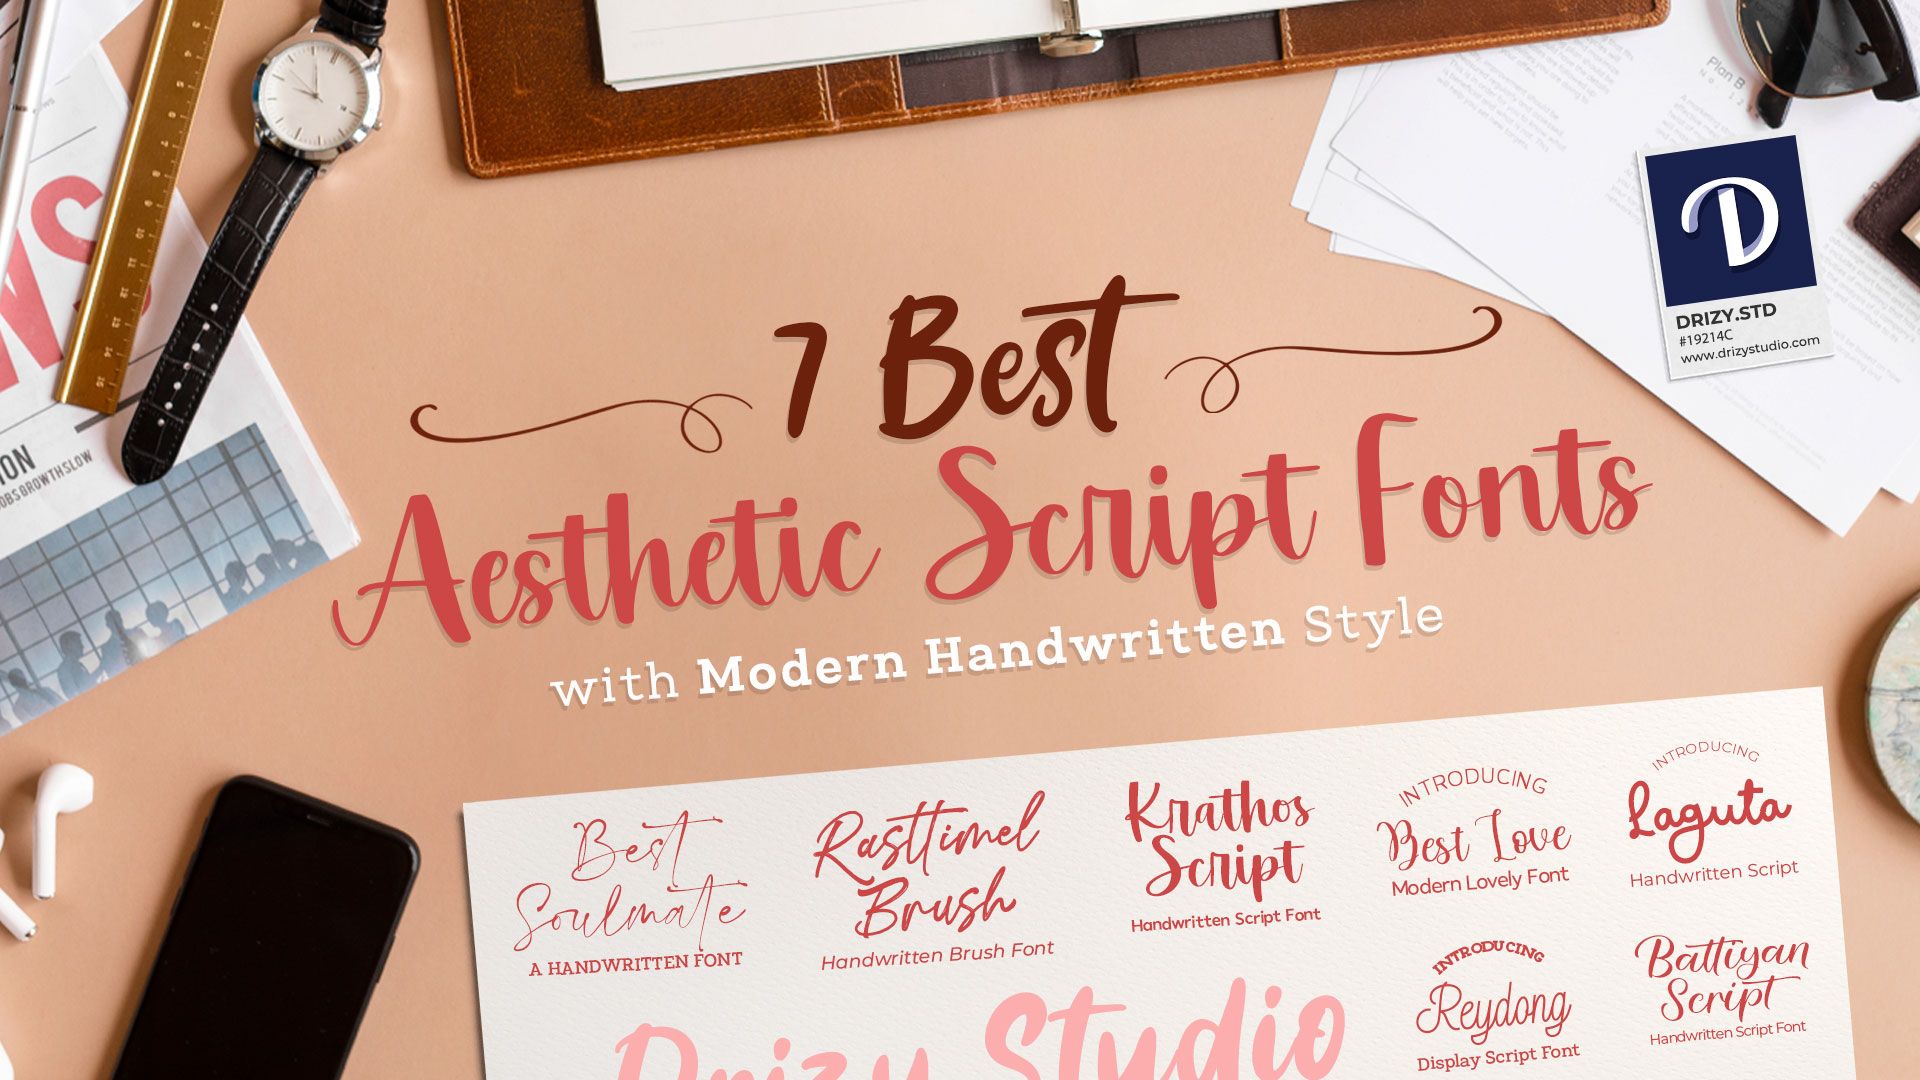 7 Best Aesthetic Script Fonts with Modern Handwritten Style cover